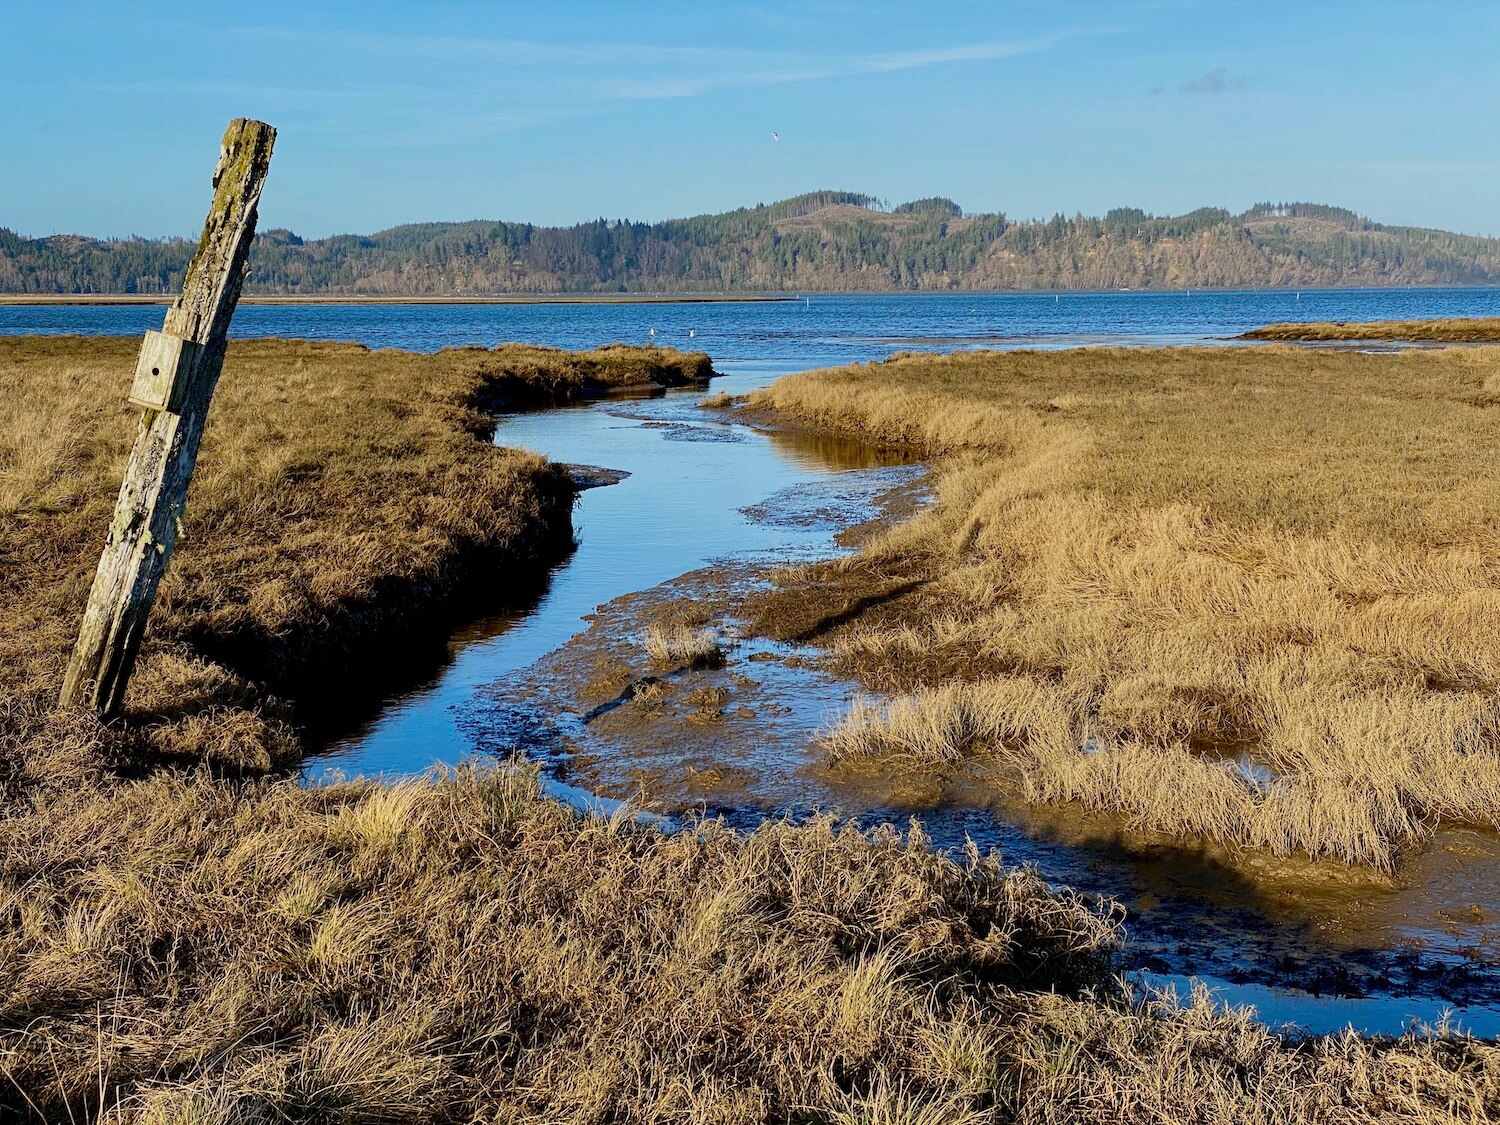 The estuary area in the grass fields in front of the Tokeland Hotel, on the Washignton Coast. There is a post with a small bird house box and a slough of water leads out to a larger blue bay. The hills in the distance have been partly logged and the sky is blue.